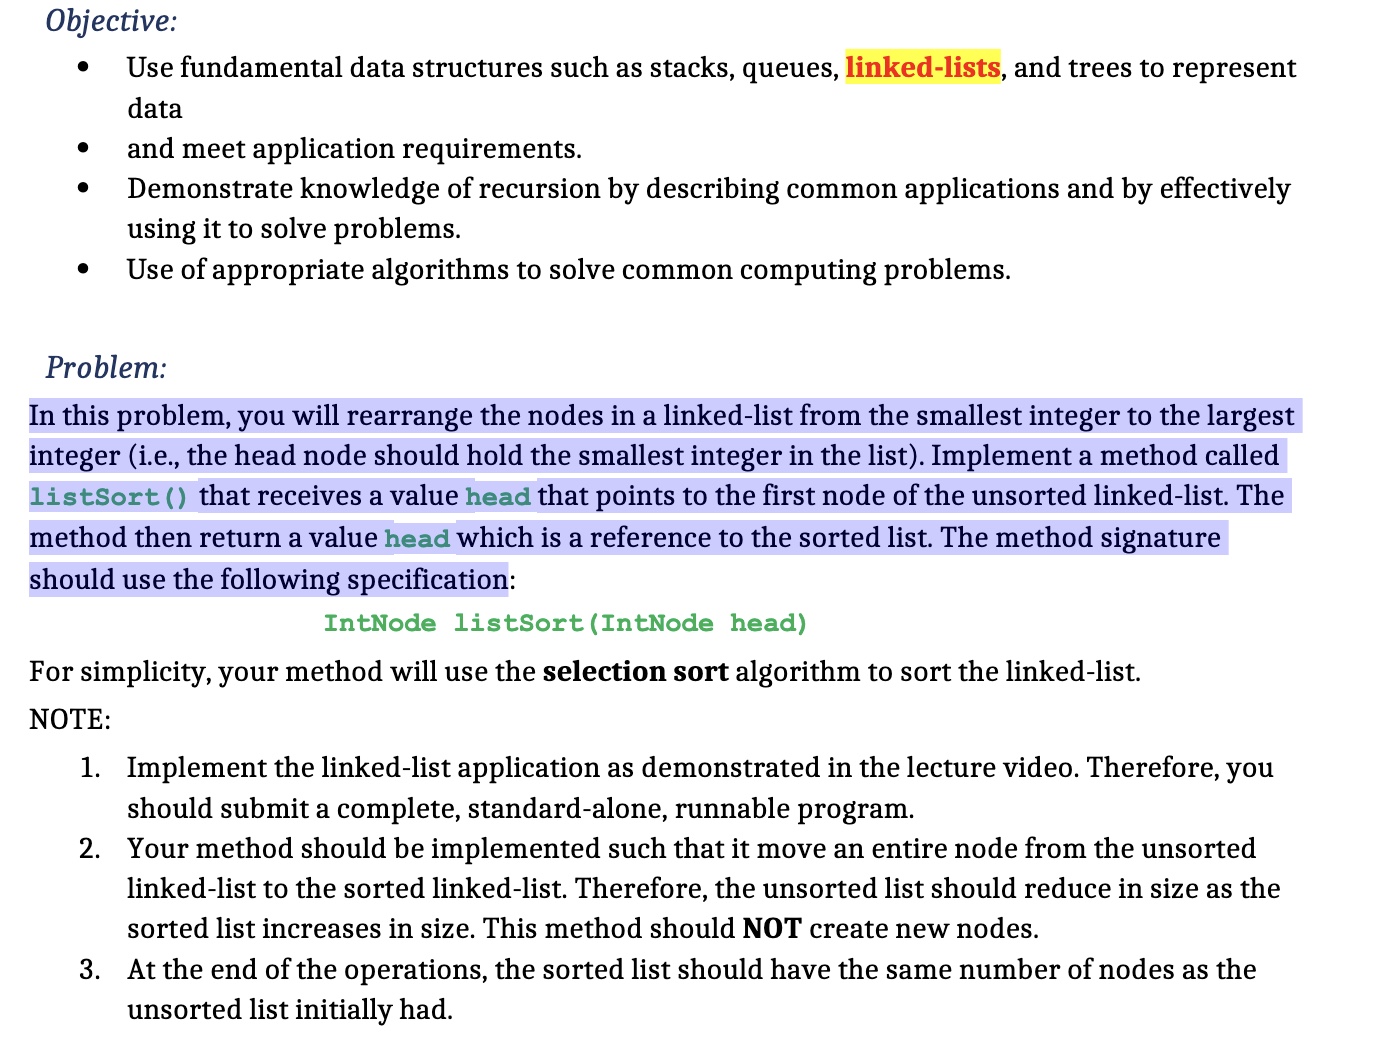 Objective: - Use fundamental data structures such as stacks, queues, linked-lists, and trees to represent data and meet application requirements. - Demonstrate knowledge of recursion by describing common applications and by effectively using it to solve problems. - Use appropriate algorithms to solve common computing problems. Problem: In this problem, you will rearrange the nodes in a linked-list from the smallest integer to the largest integer (i.e., the head node should hold the smallest integer in the list). Implement a method called listSort() that receives a value head that points to the first node of the unsorted linked-list. The method then returns a value head which is a reference to the sorted list. The method signature should use the following specification: IntNode listSort(IntNode head) For simplicity, your method will use the selection sort algorithm to sort the linked-list. NOTE: 1. Implement the linked-list application as demonstrated in the lecture video. Therefore, you should submit a complete, stand-alone, runnable program. 2. Your method should be implemented such that it moves an entire node from the unsorted linked-list to the sorted linked-list. Therefore, the unsorted list should reduce in size as the sorted list increases in size. This method should NOT create new nodes. 3. At the end of the operations, the sorted list should have the same number of nodes as the unsorted list initially had.